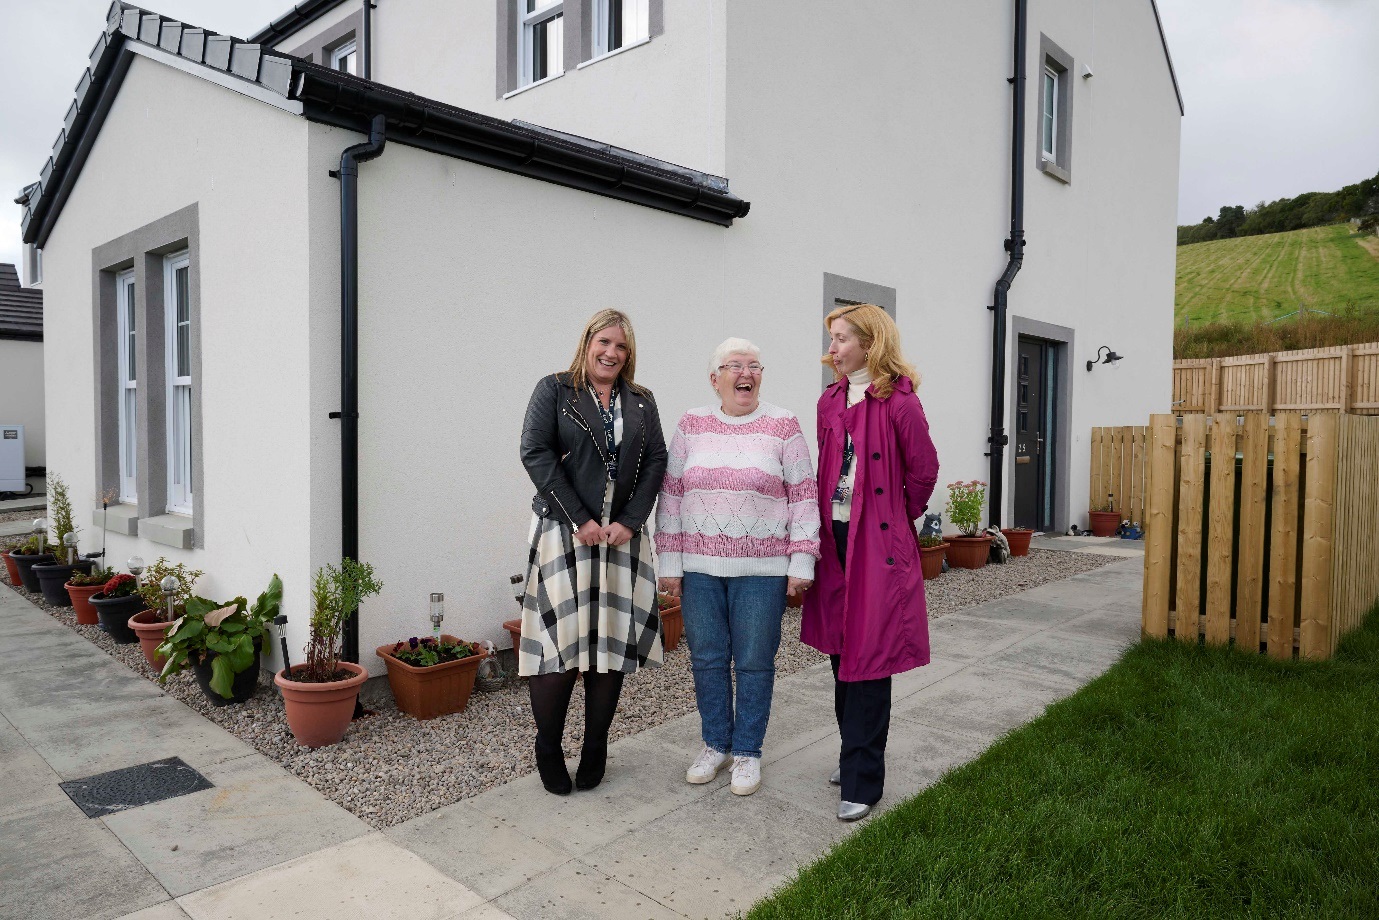 Cairn unveils new affordable housing development in Rosemarkie